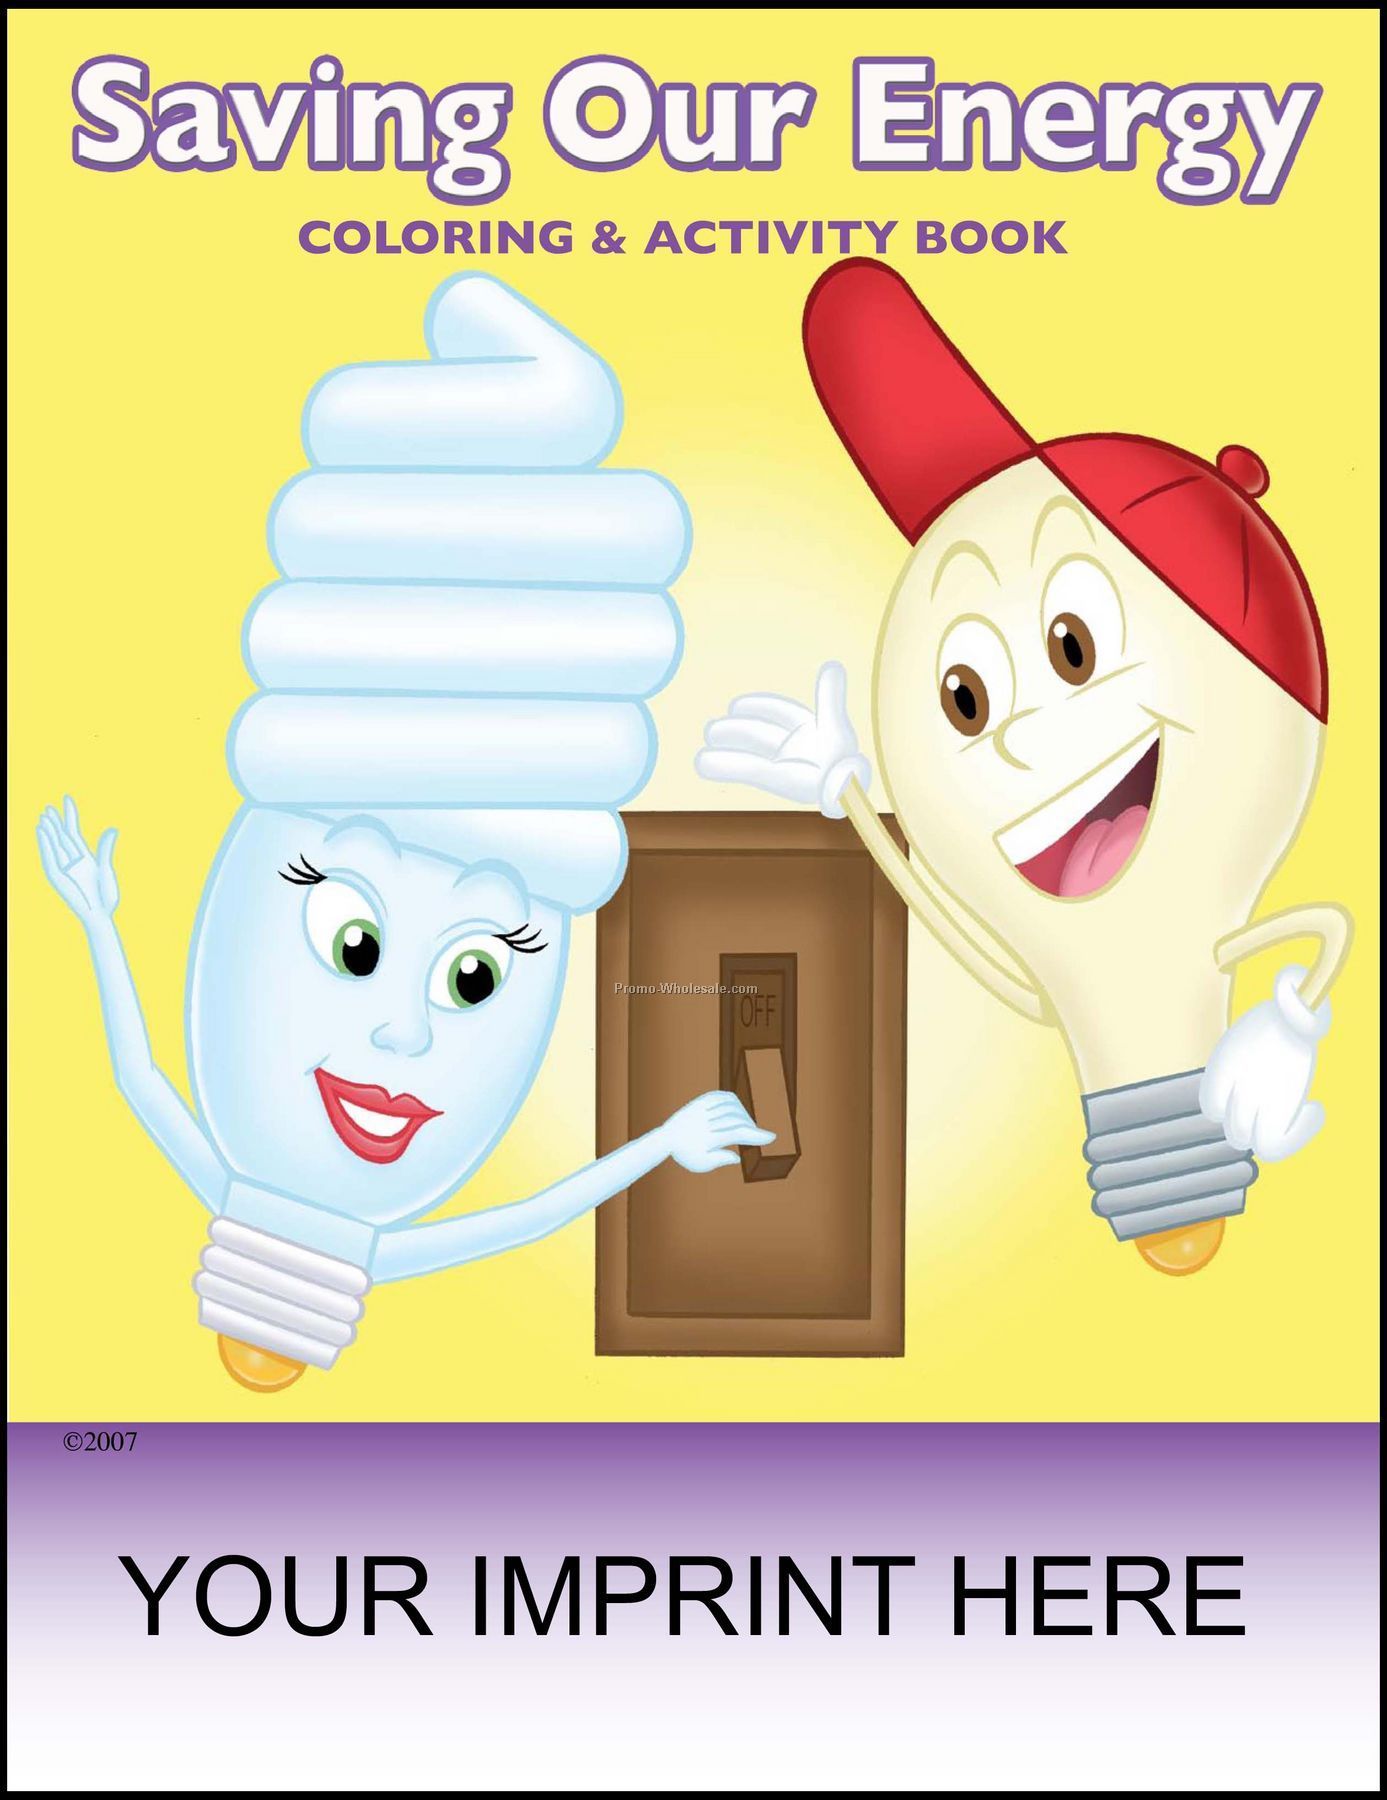 8-3/8"x10-7/8" Saving Our Energy Coloring & Activity Book